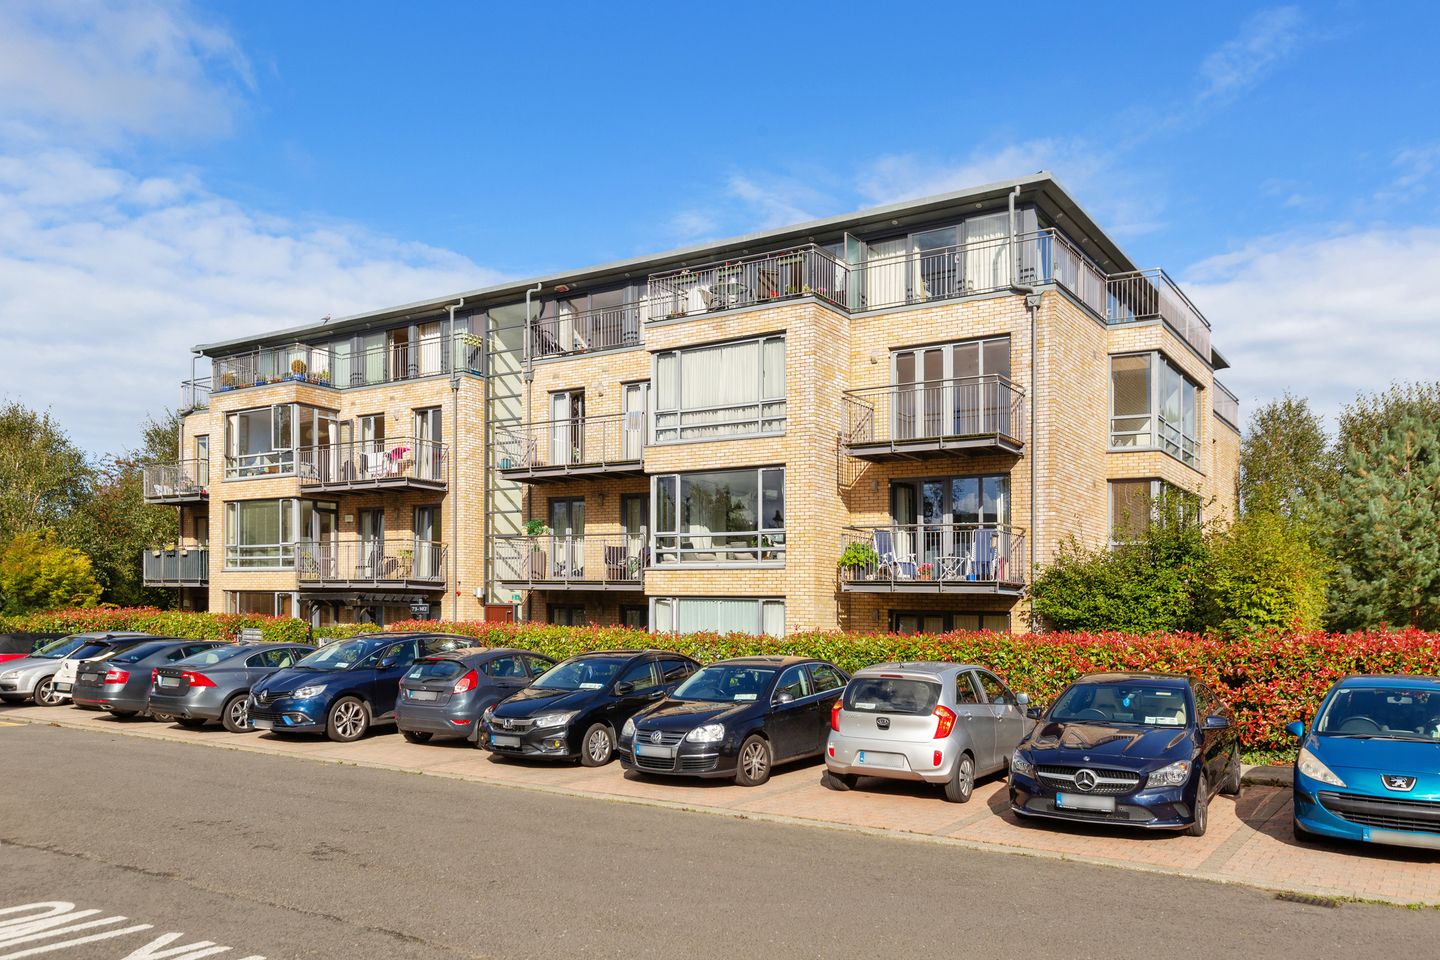 Apartment 76, Priory Court, Delgany, Co. Wicklow, A63ED79